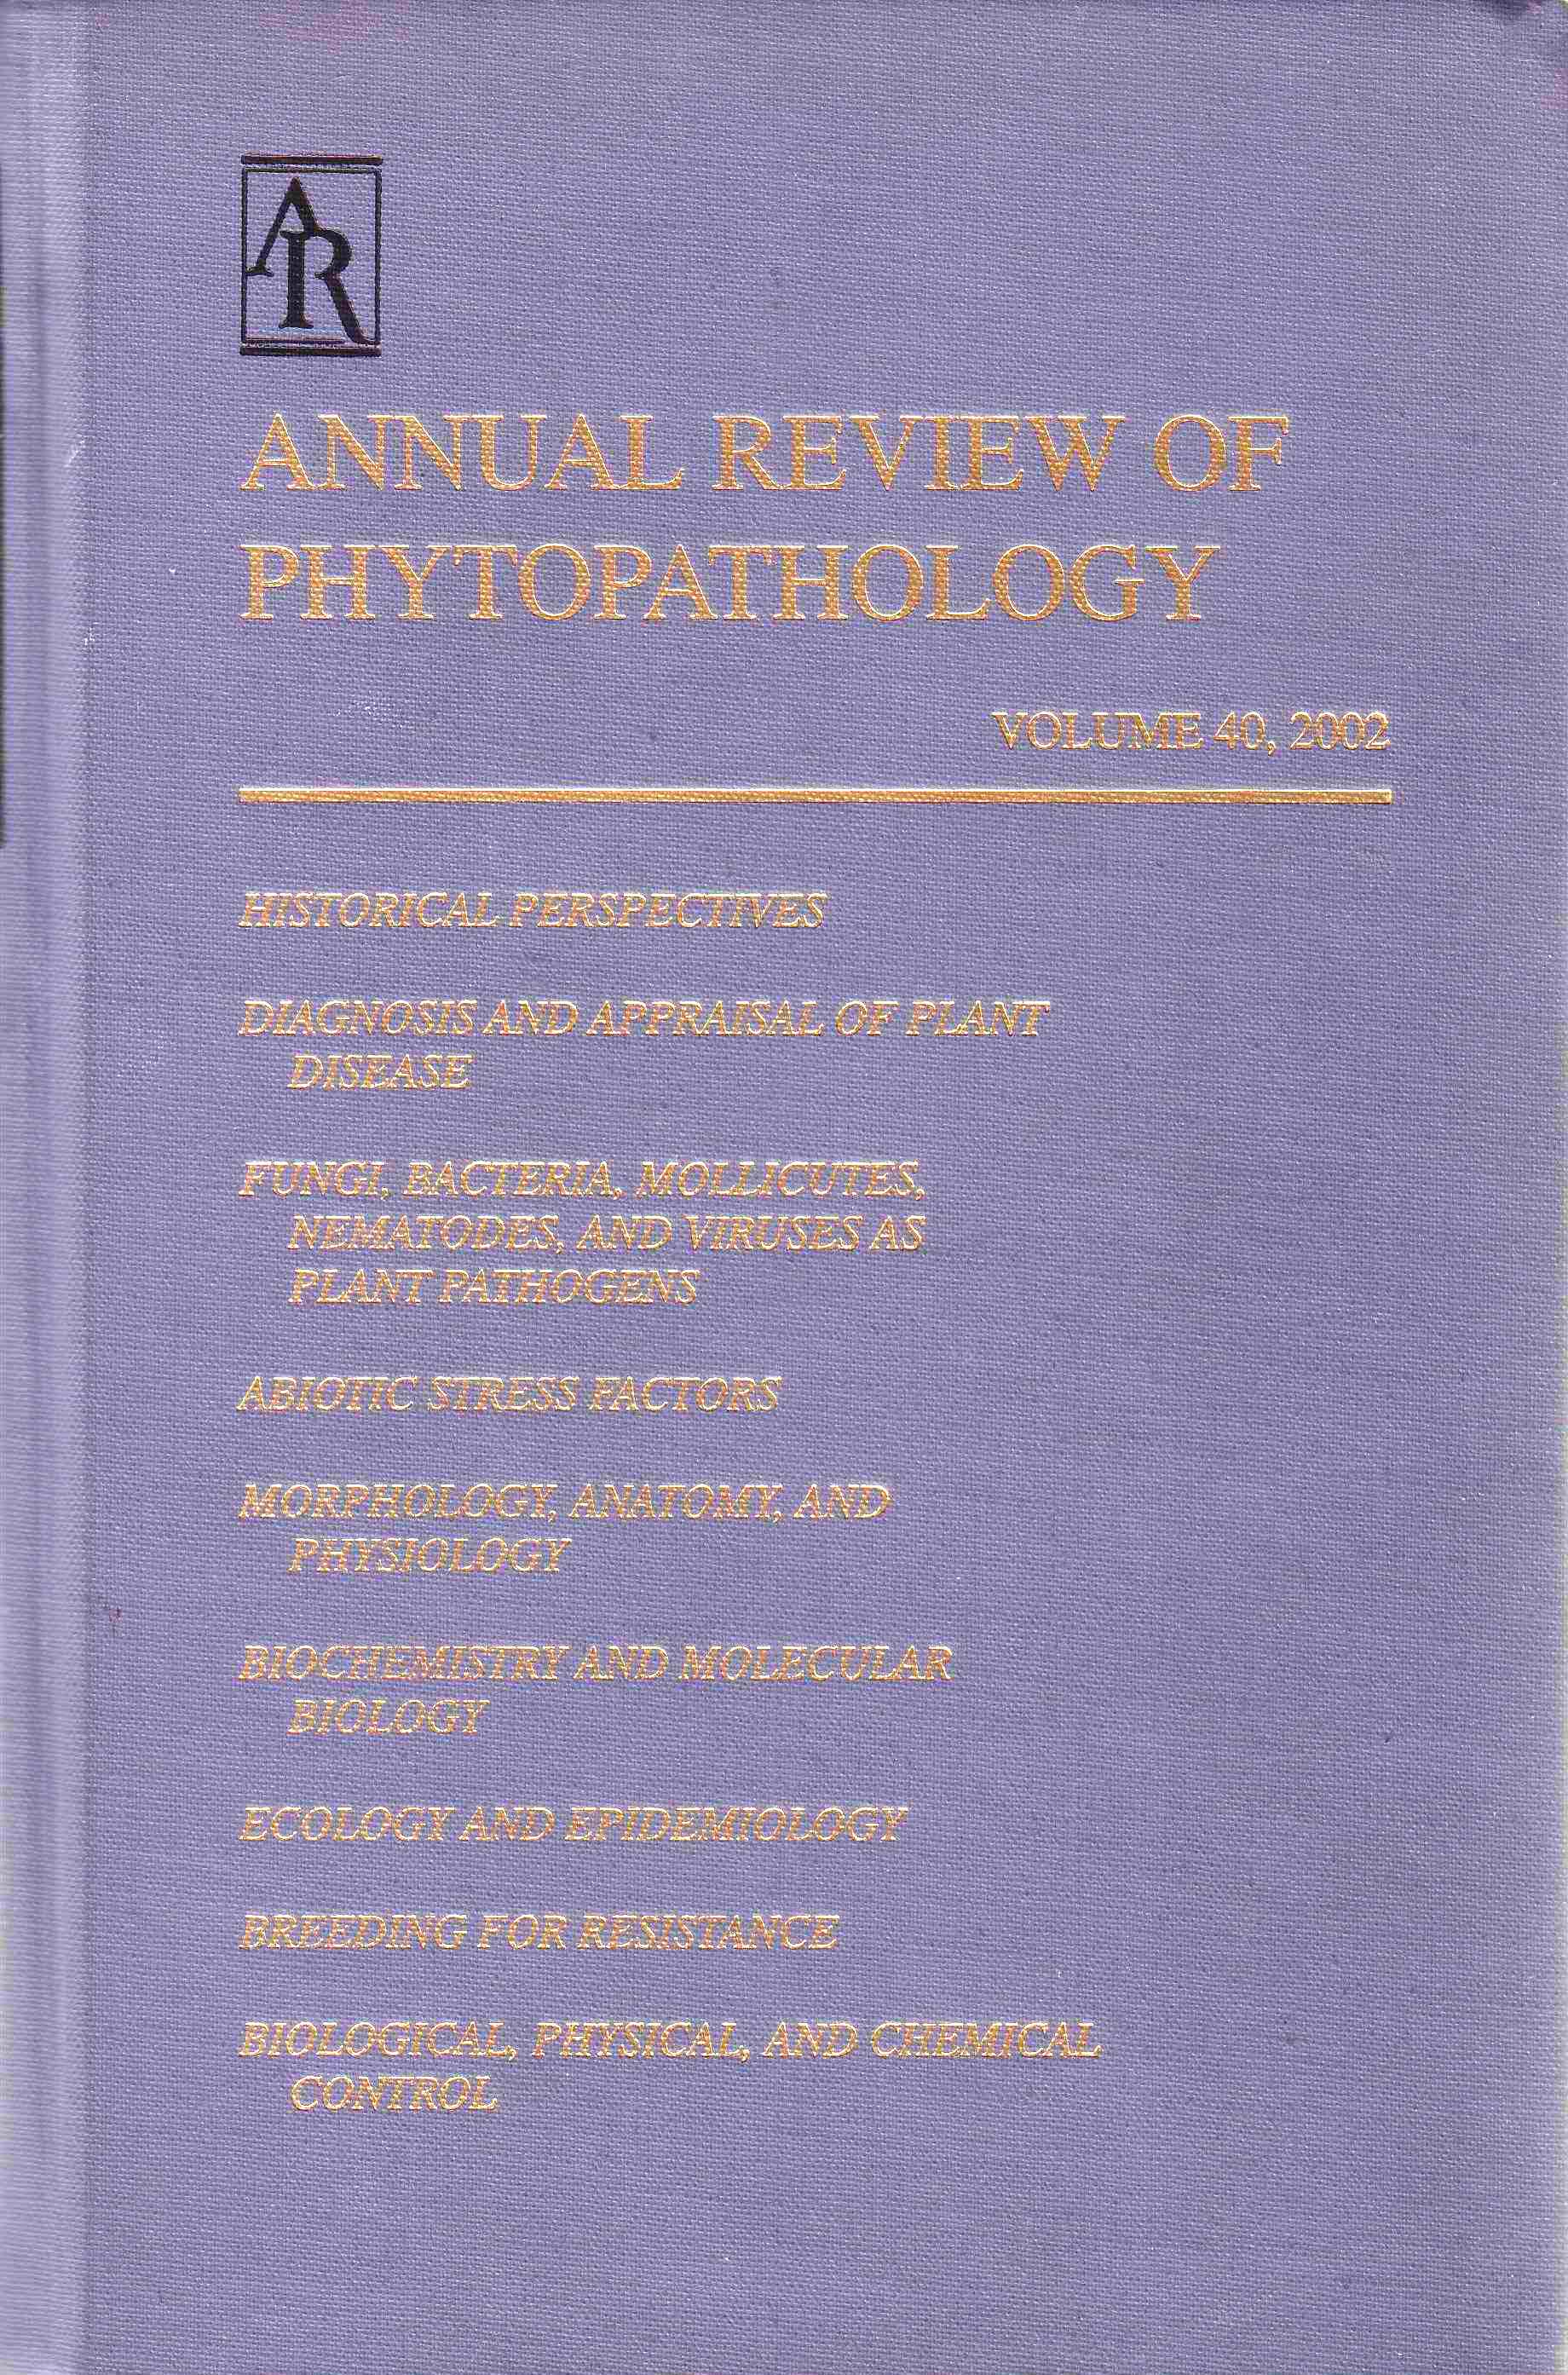 Annual Review of Phytopathology, Volume 40, 2002  by Robert K. Webster (Editor), Gregory Shaner (Associate Editor) and Neal K. Van Alfen (Associate Editor)